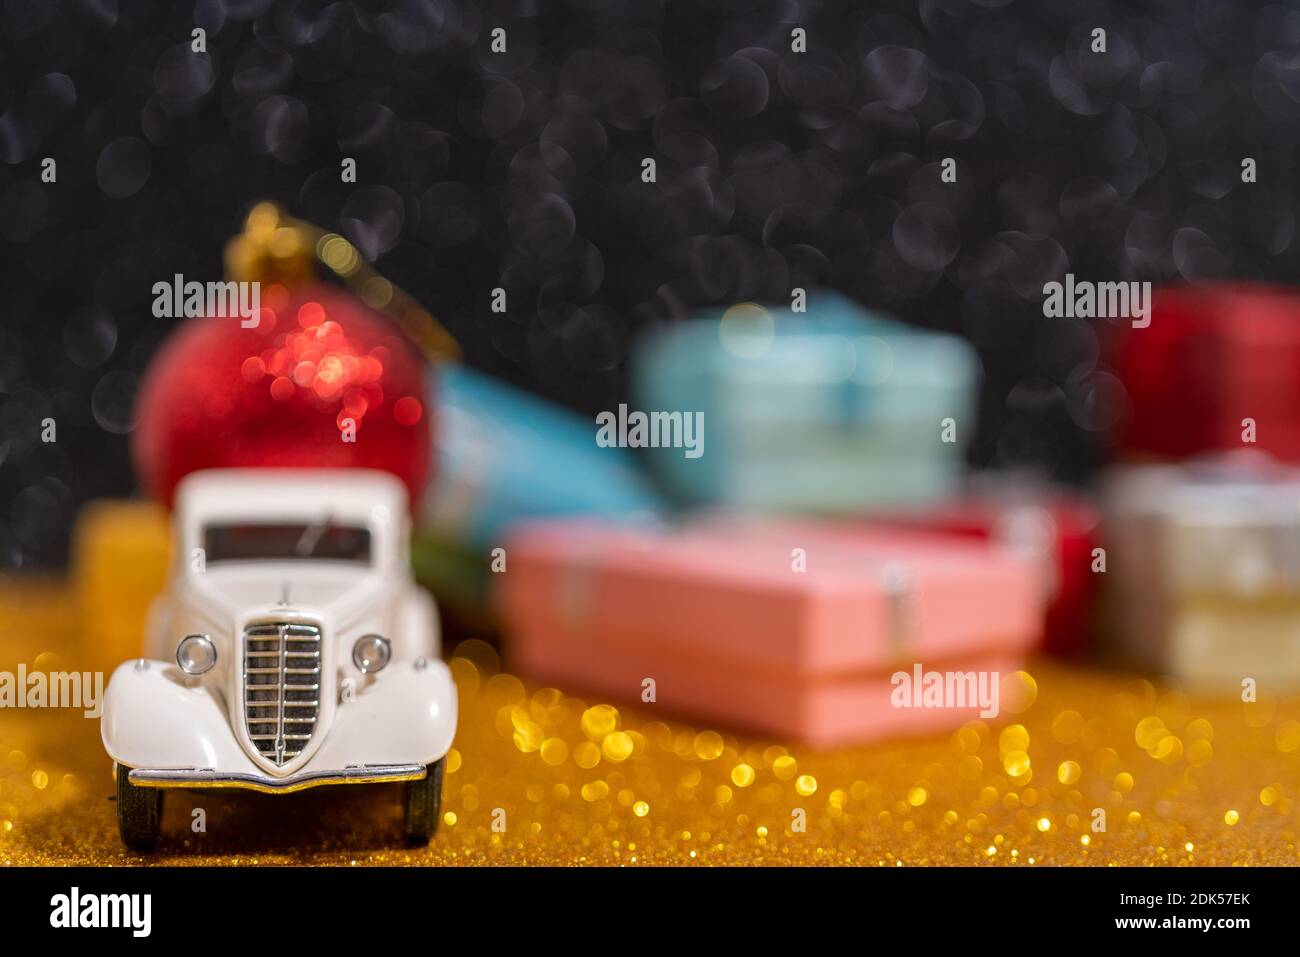 A small toy car delivery of Christmas gifts. Beautiful festive Christmas composition of gifts and toys Stock Photo